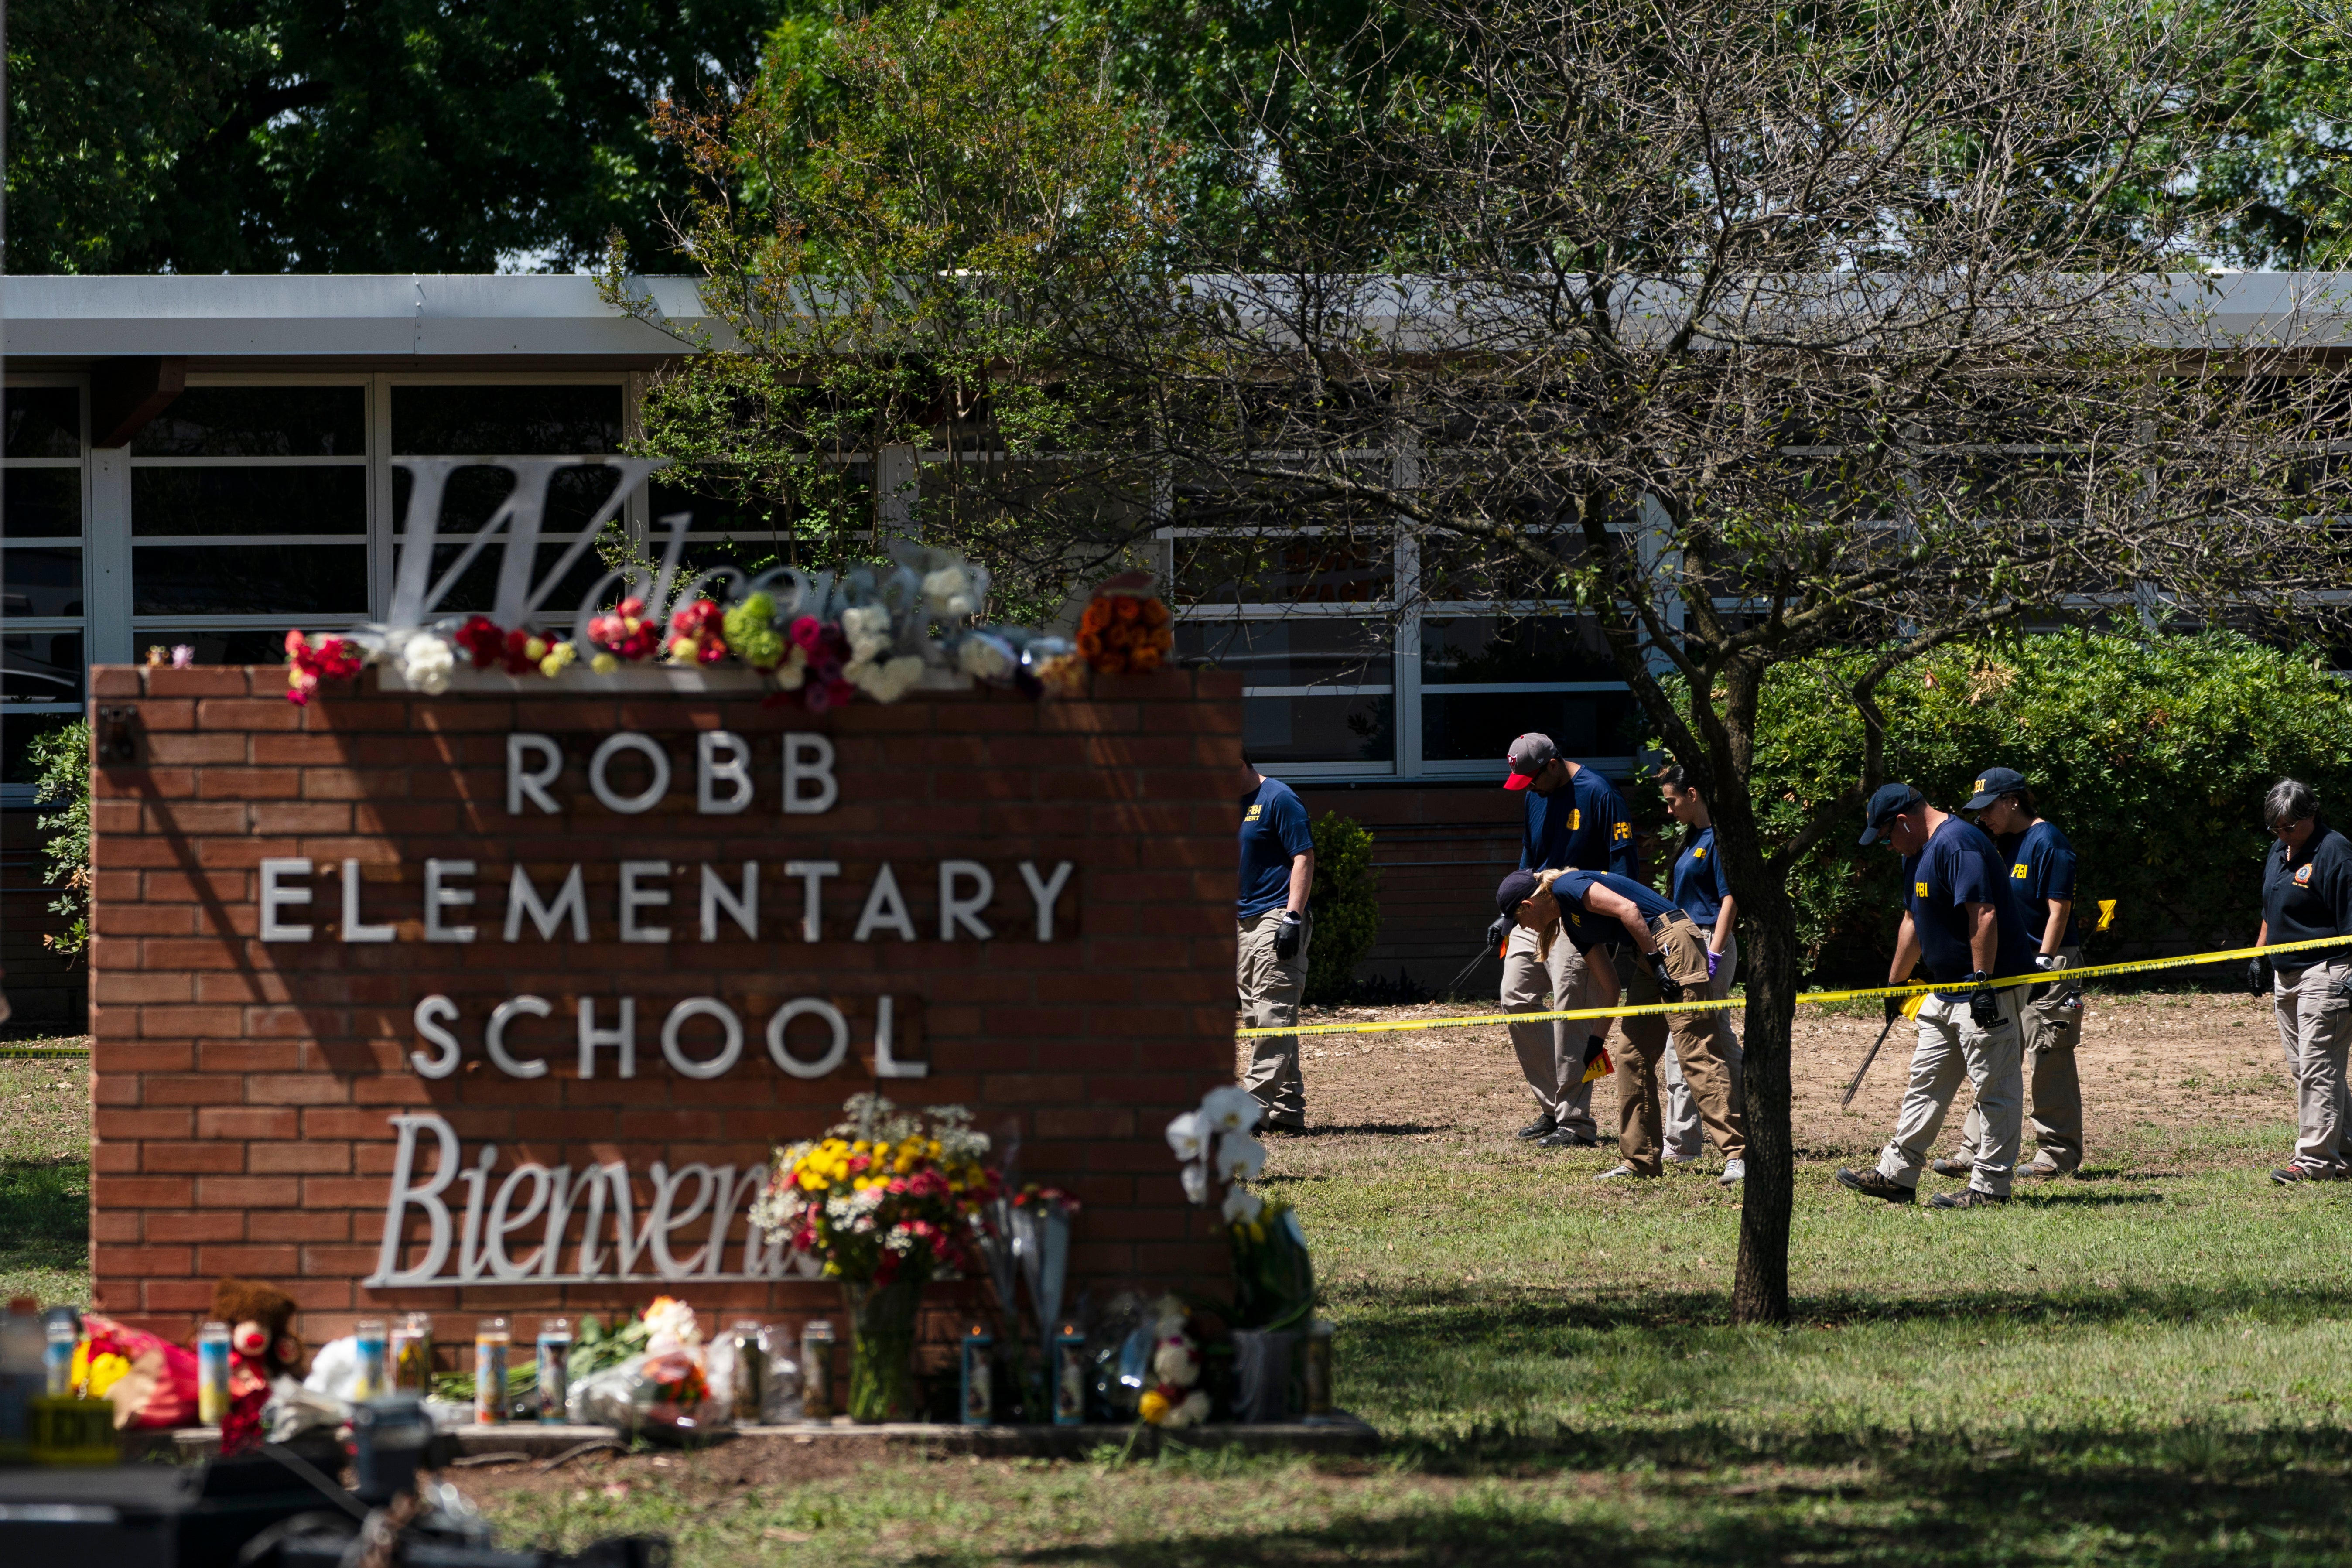 The most recent mass school shooting was at an elementary school in Texas